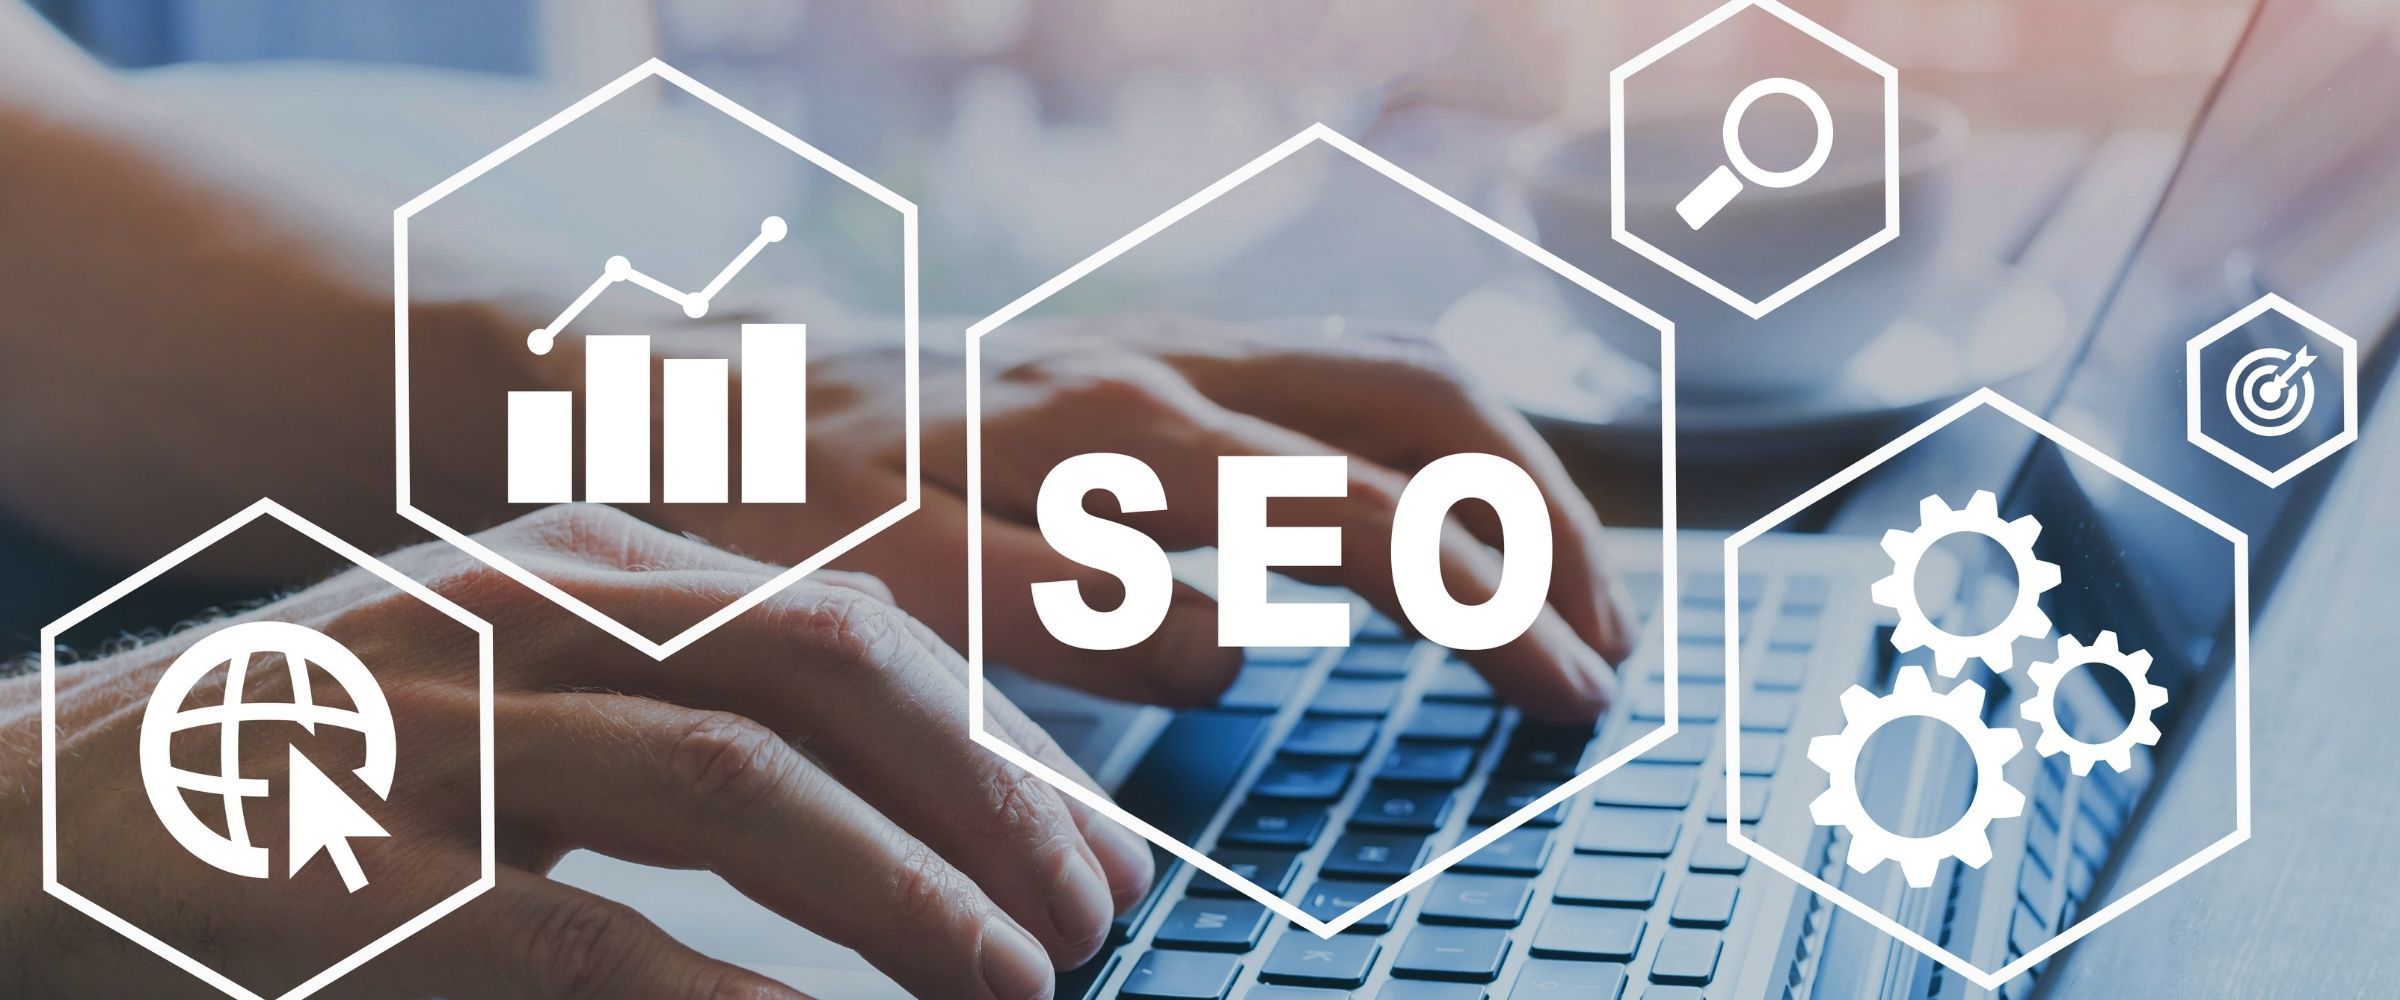 Seo search engine optimization services in vancouver